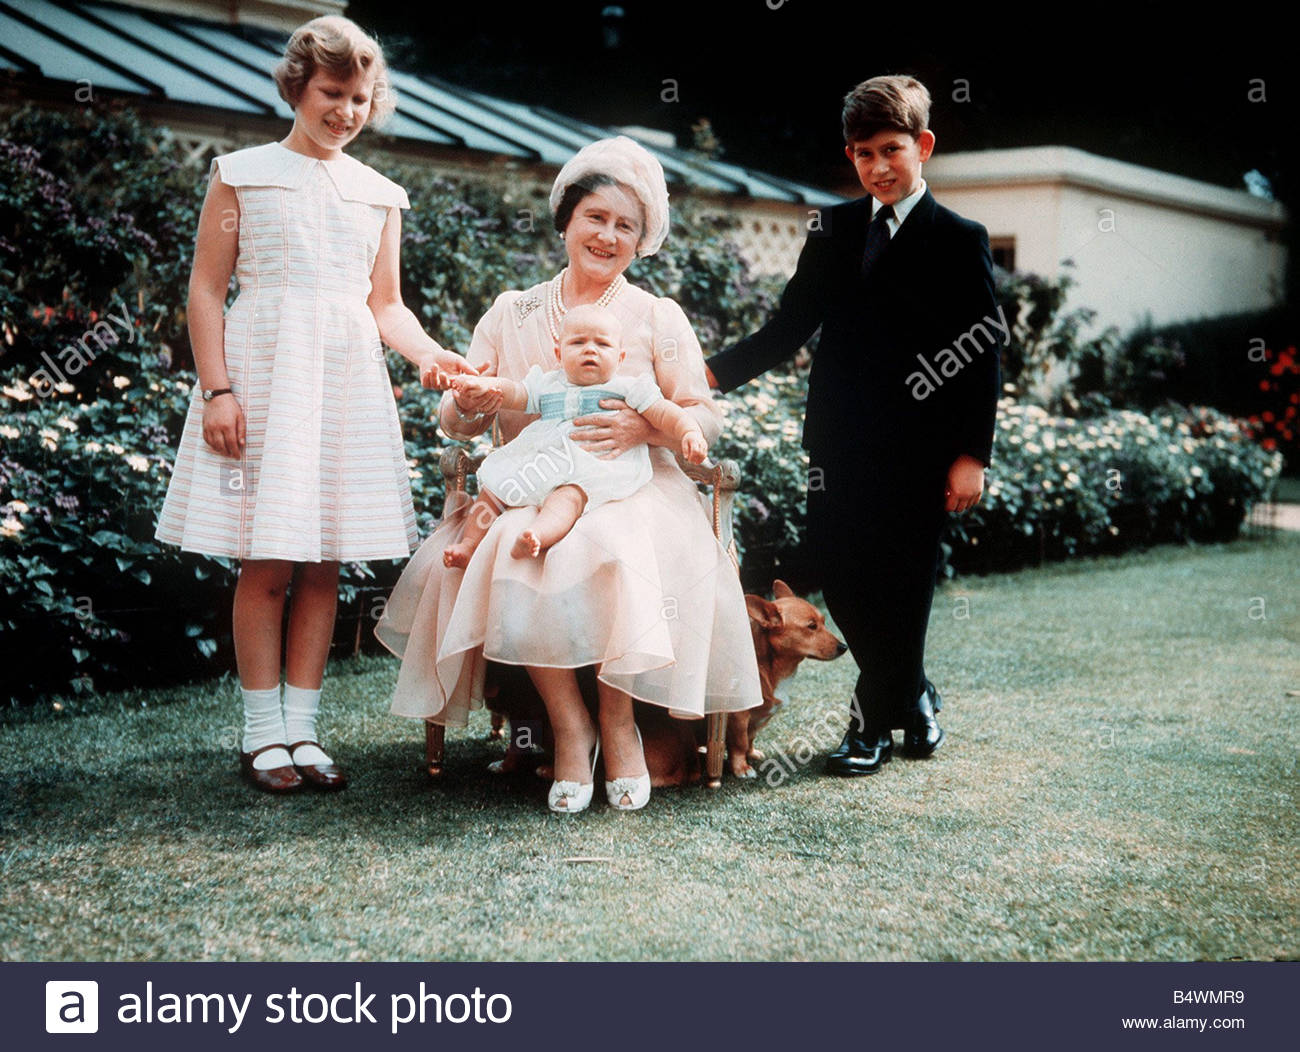 queen-mother-with-her-grandchildren-princess-anne-prince-charles-and-B4WMR9.jpg